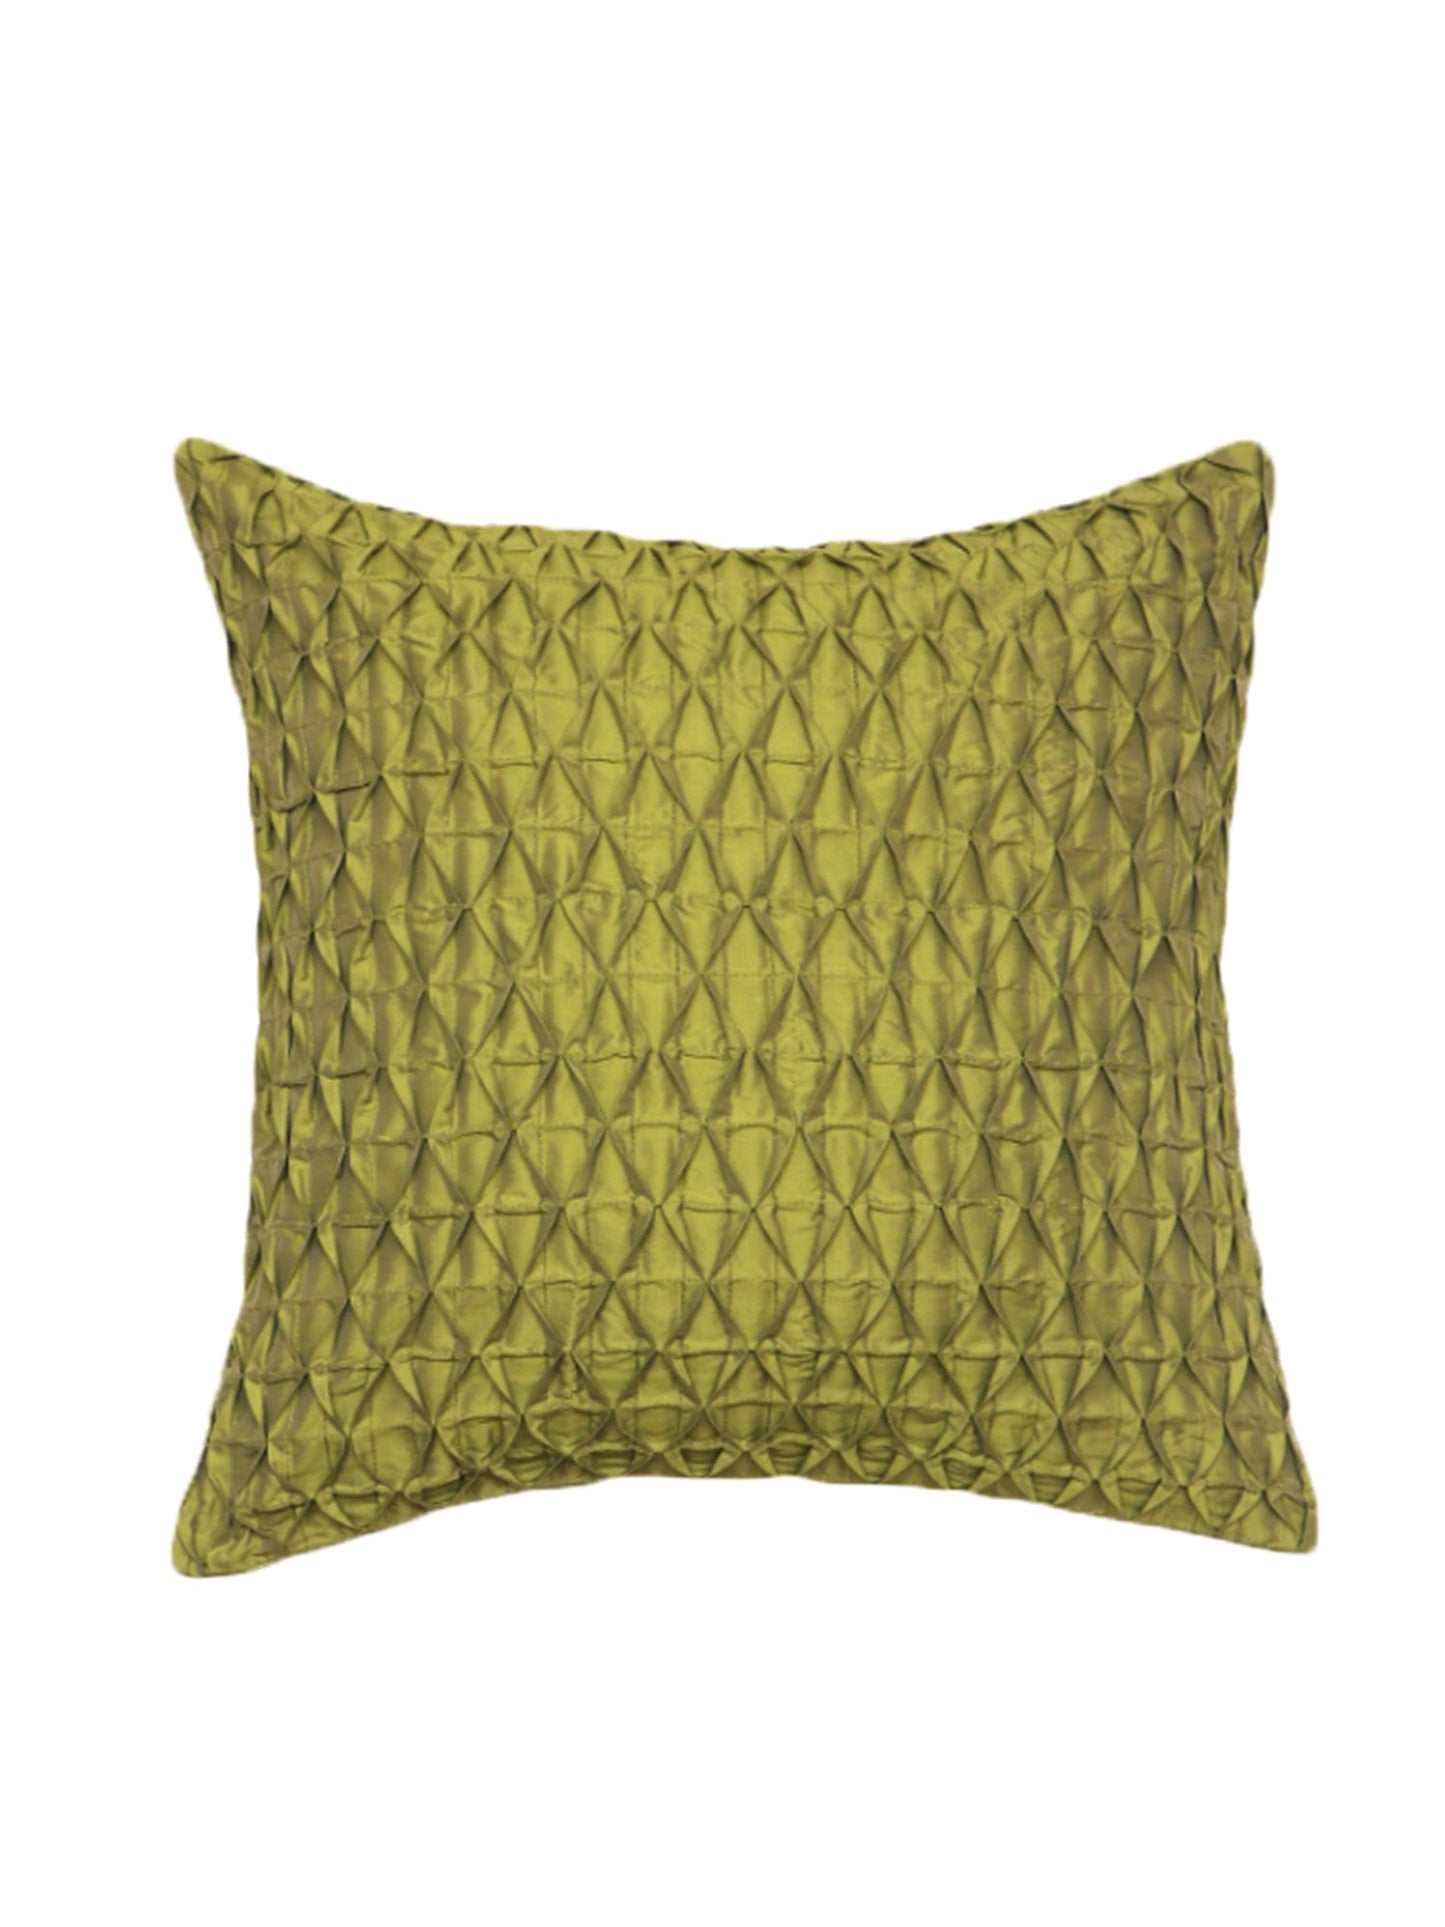 Technique Cushion Cover 100% Polyester Shell Pleated Green - 16" X 16"